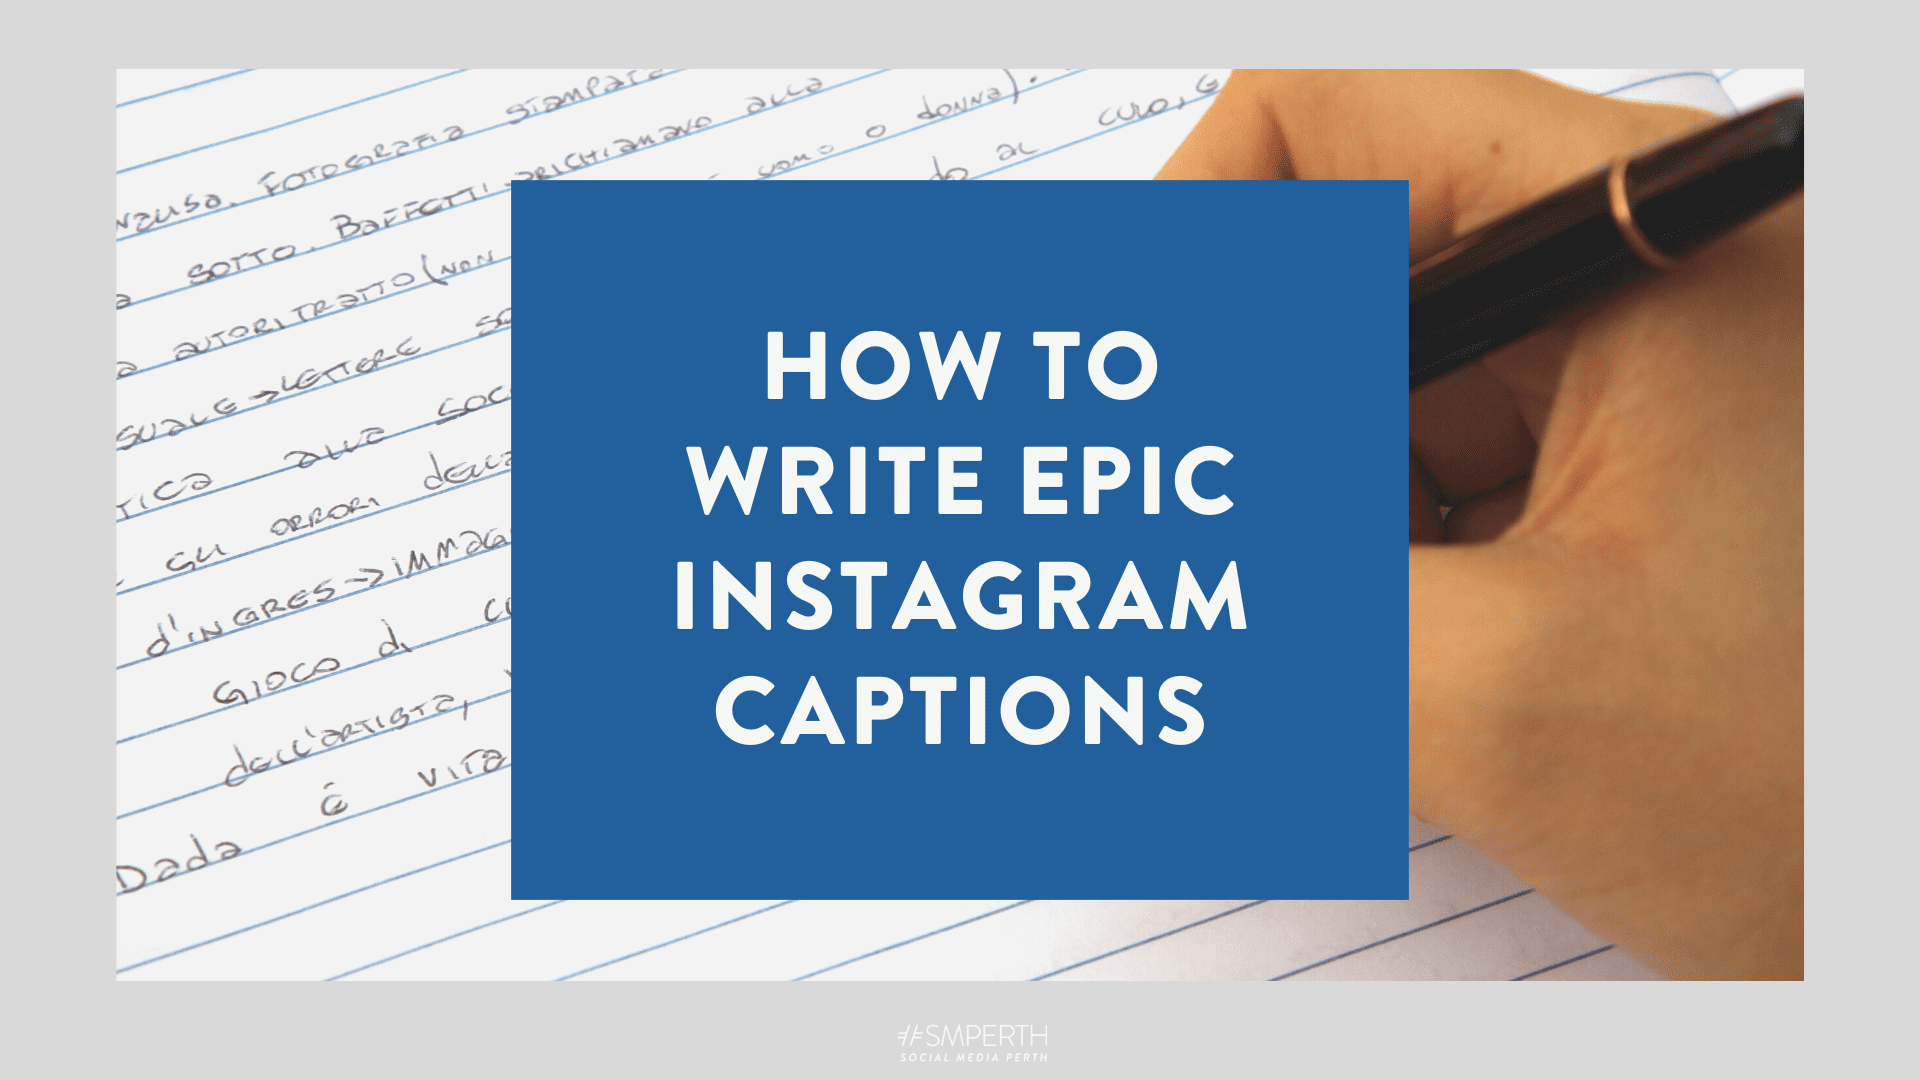 How to Write Epic Instagram Captions